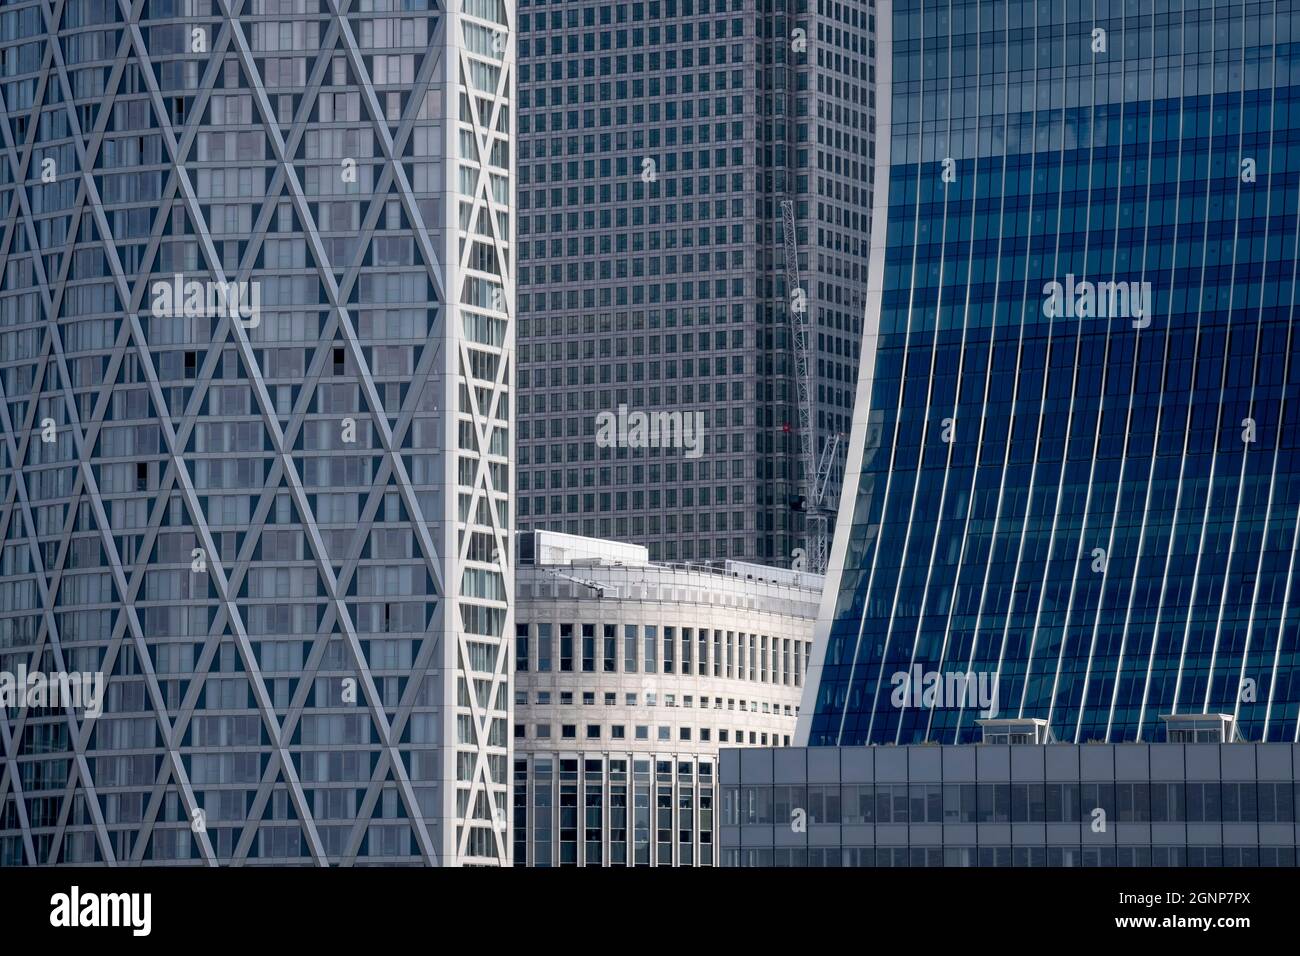 Corporate high-rise offices at Canary Wharf in London Docklands, on 16th September 2021, in London, England. Canary Wharf was once a thriving Victorian cargo dock but after Thames shipping declined from the 1960s, its derelict areas were redeveloped in the 19080 by Margaret Thatcher's Docklands Development Corporation created one of the UK’s main financial centres, now home to the European Headquarters of numerous major banks including Barclays, Credit Suisse and HSBC. Stock Photo